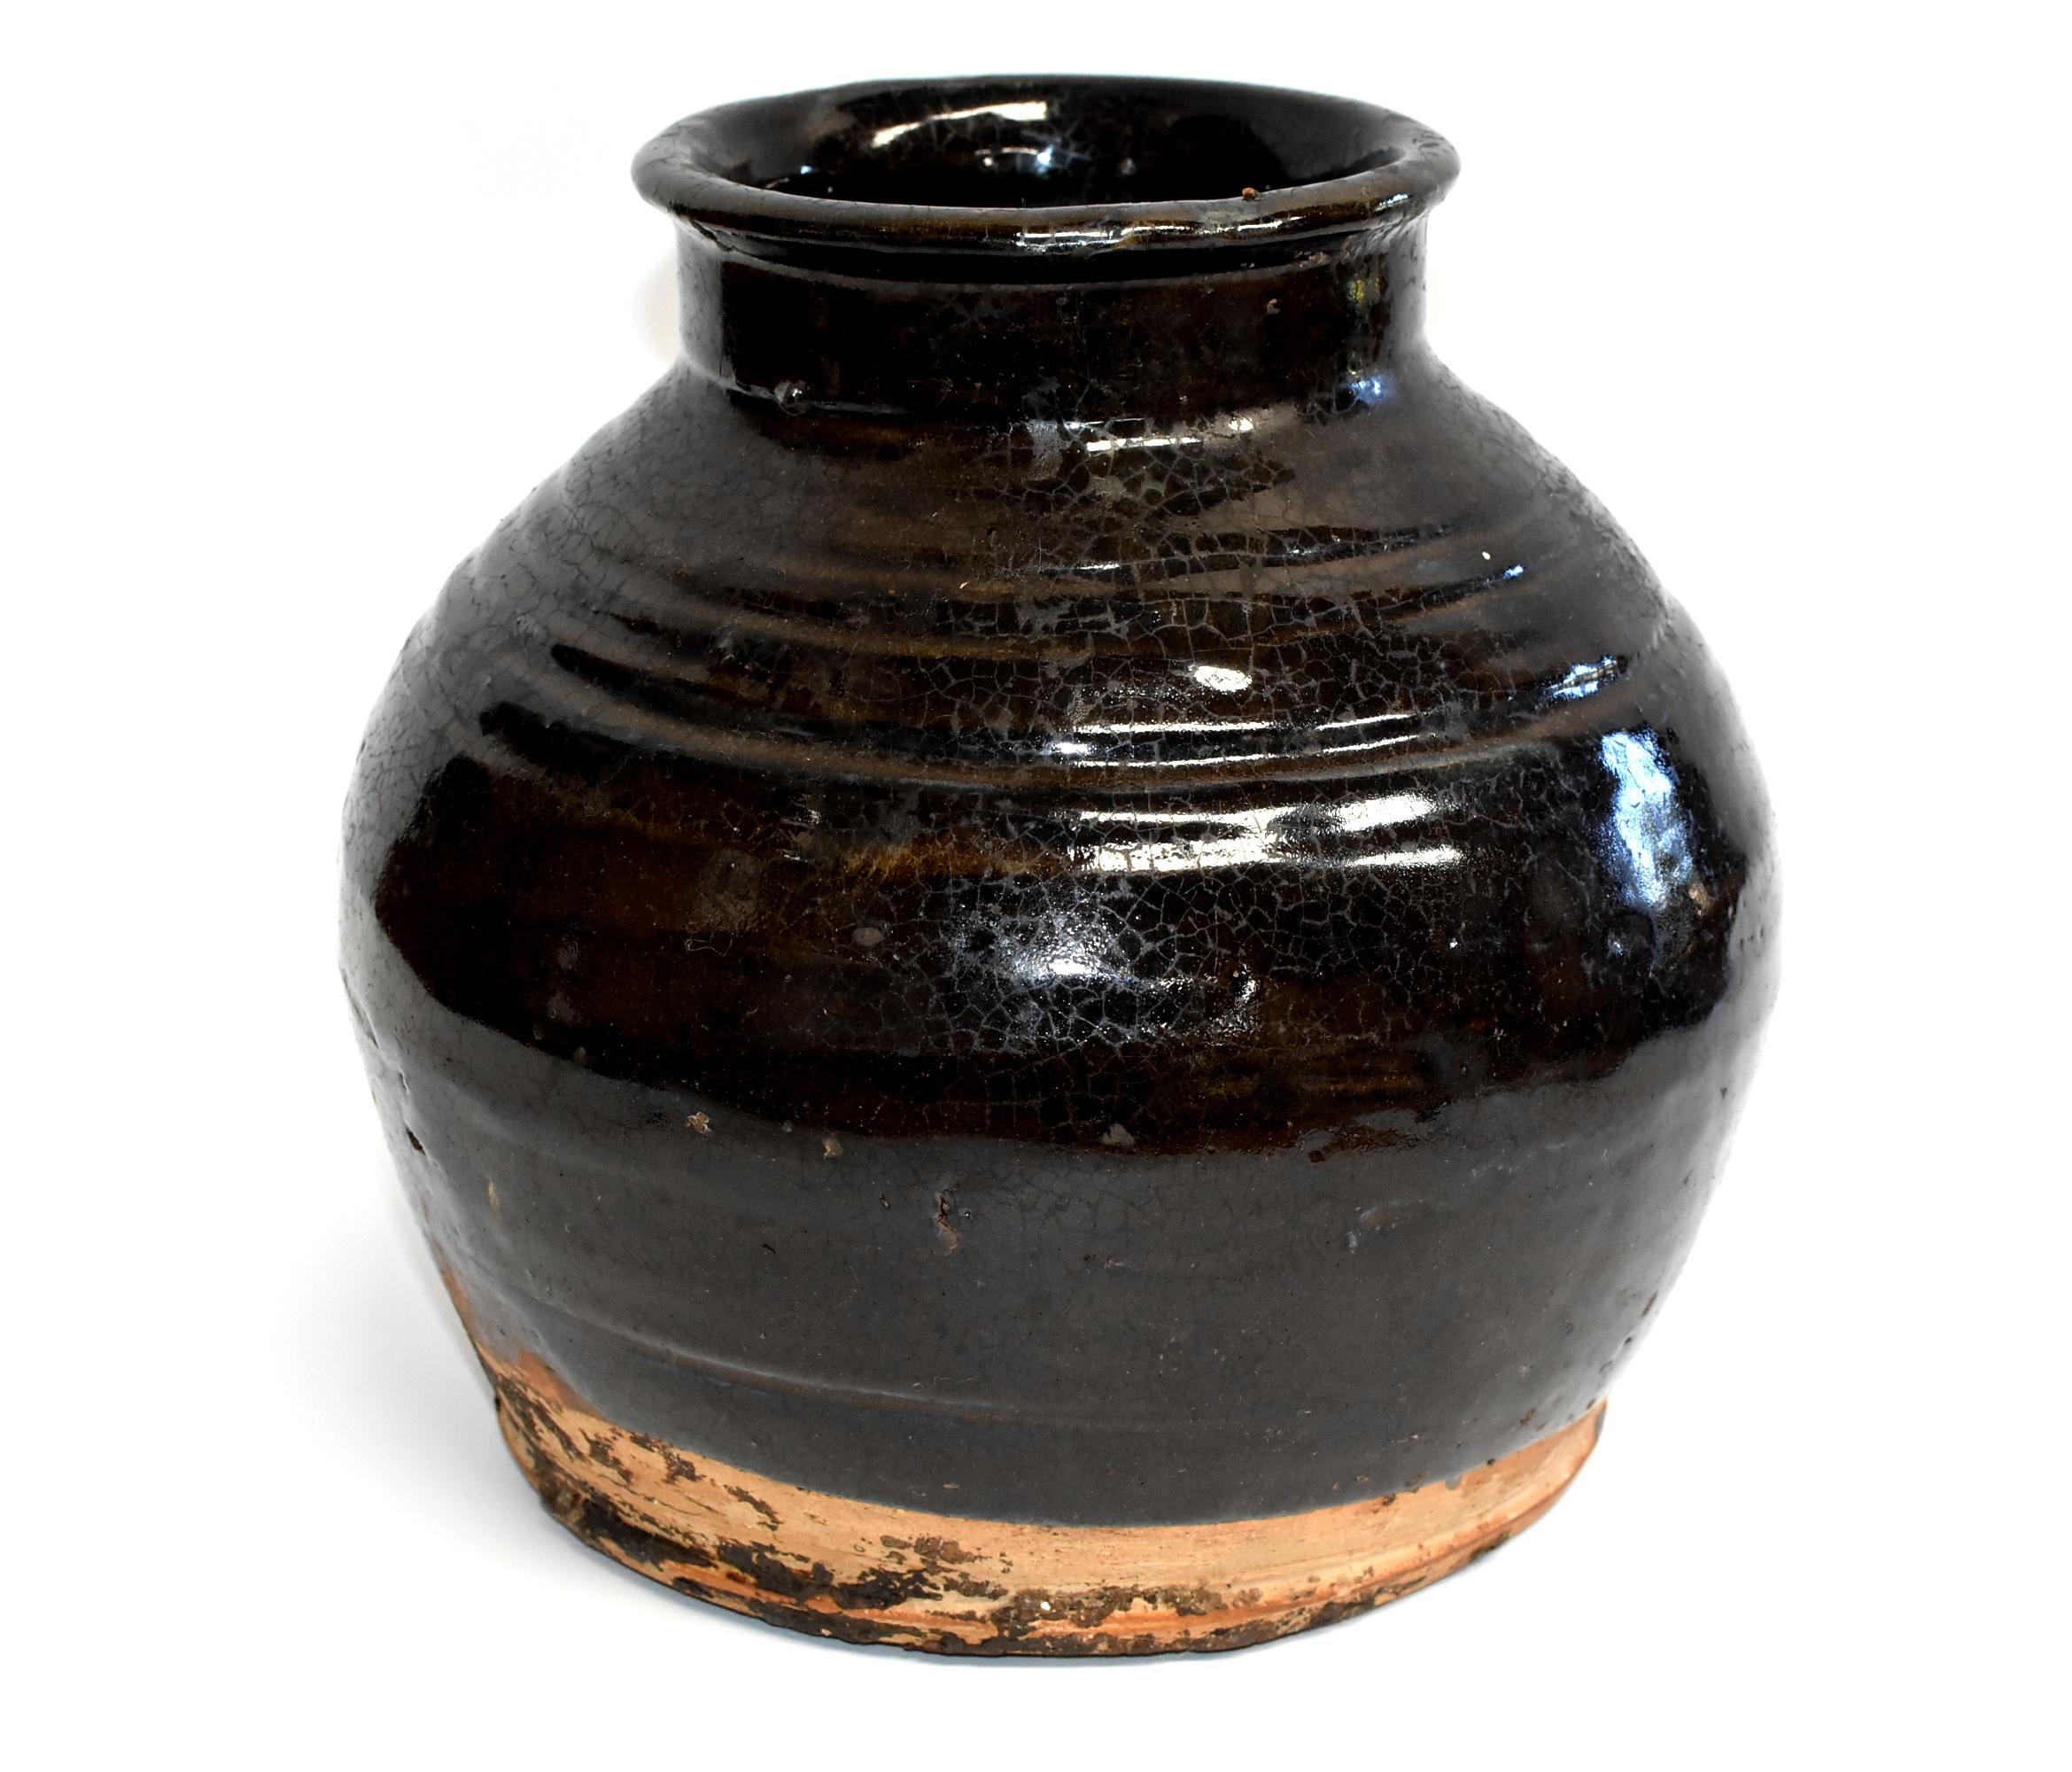 This wonderful piece is from Shan Xi province, an ancient state of China. The area is famous for producing rich, aromatic, dark vinegar. Historically these jars were used to store the prized liquids. Now, their rustic, artistic appeal with the